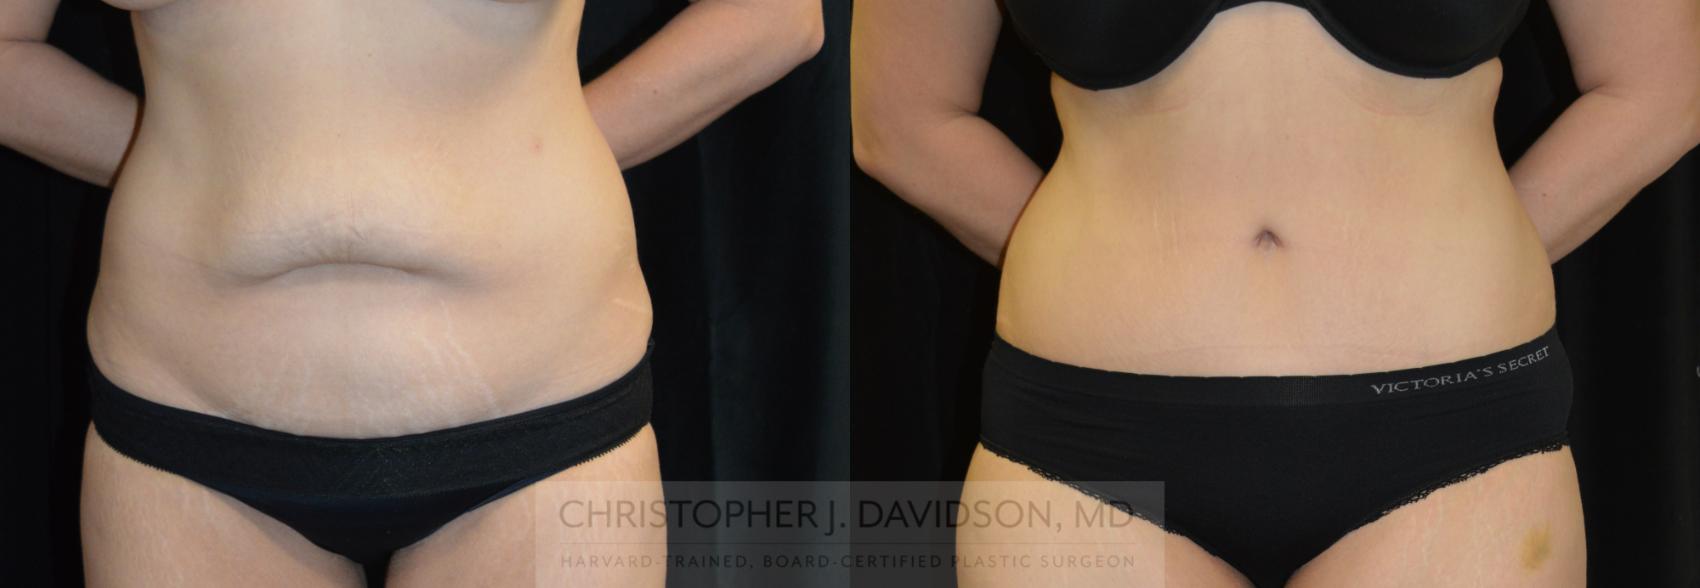 Tummy Tuck (Abdominoplasty) Case 283 Before & After Front | Boston, MA | Christopher J. Davidson, MD